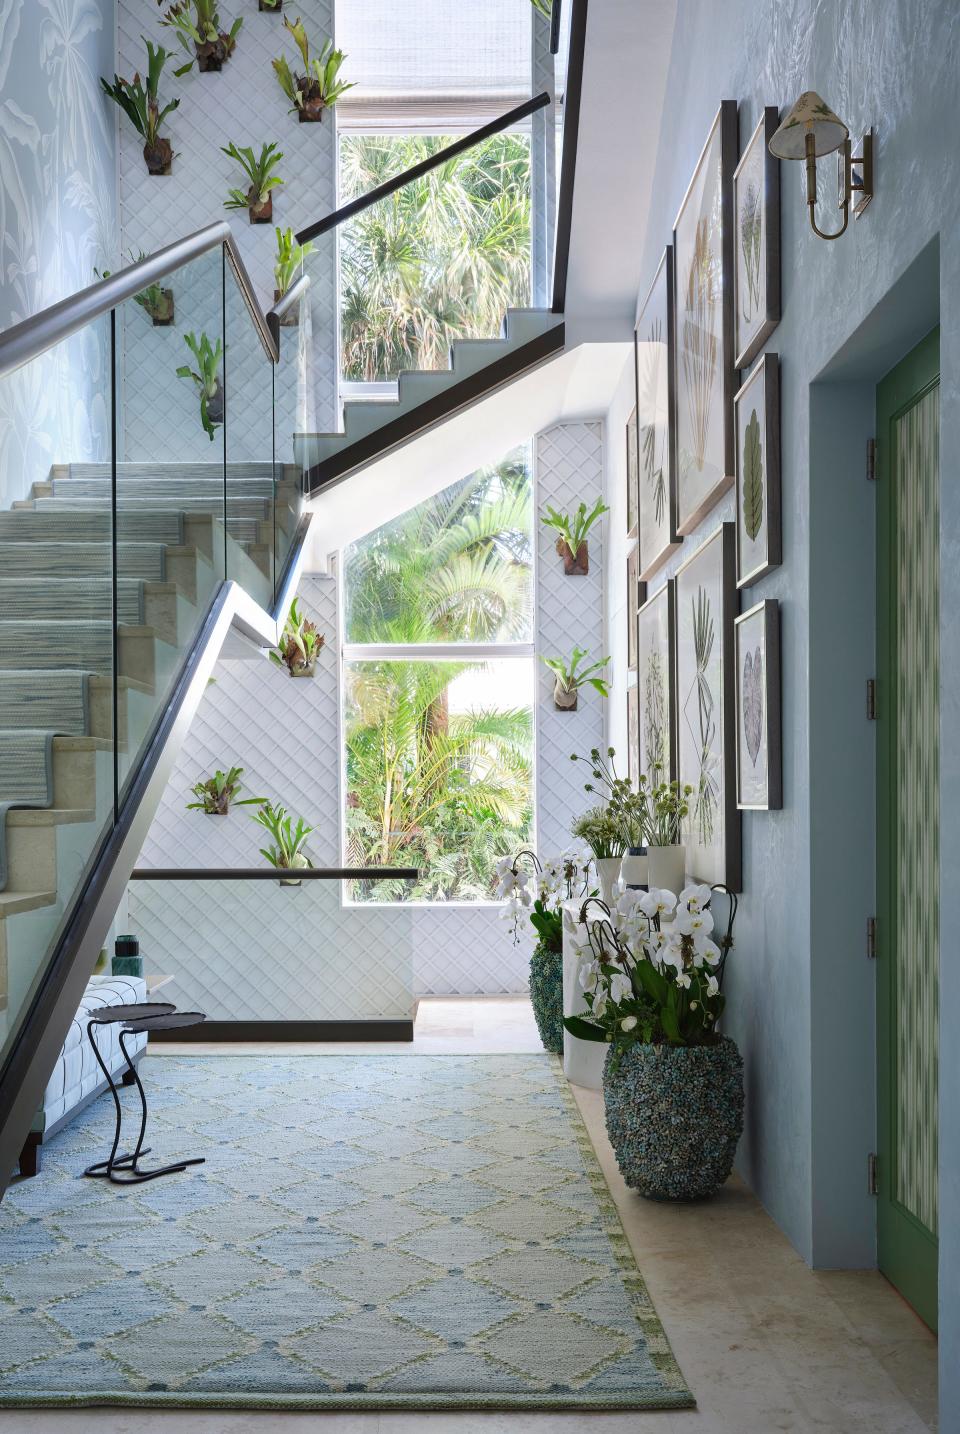 In the stair hall designed by Charlie Collins of MELROSE for the Kips Bay Decorator Show House Palm Beach, a glass-railed staircase marches past a wall decorated with staghorn ferns.